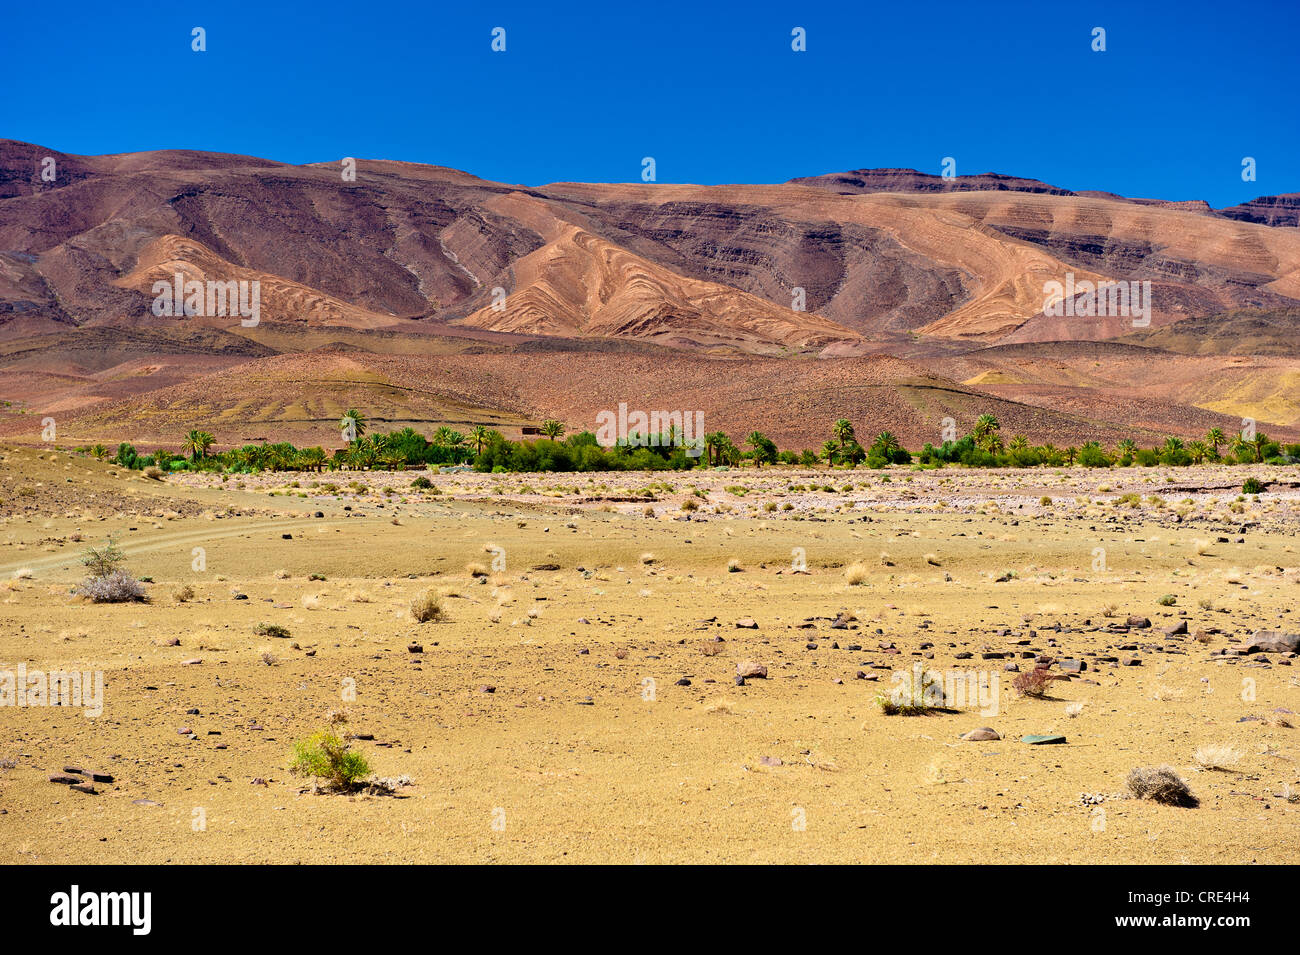 Dry, desert-like landscape with sparse tree growth and eroded hillsides, Agdz, southern Morocco, Morocco, Africa Stock Photo